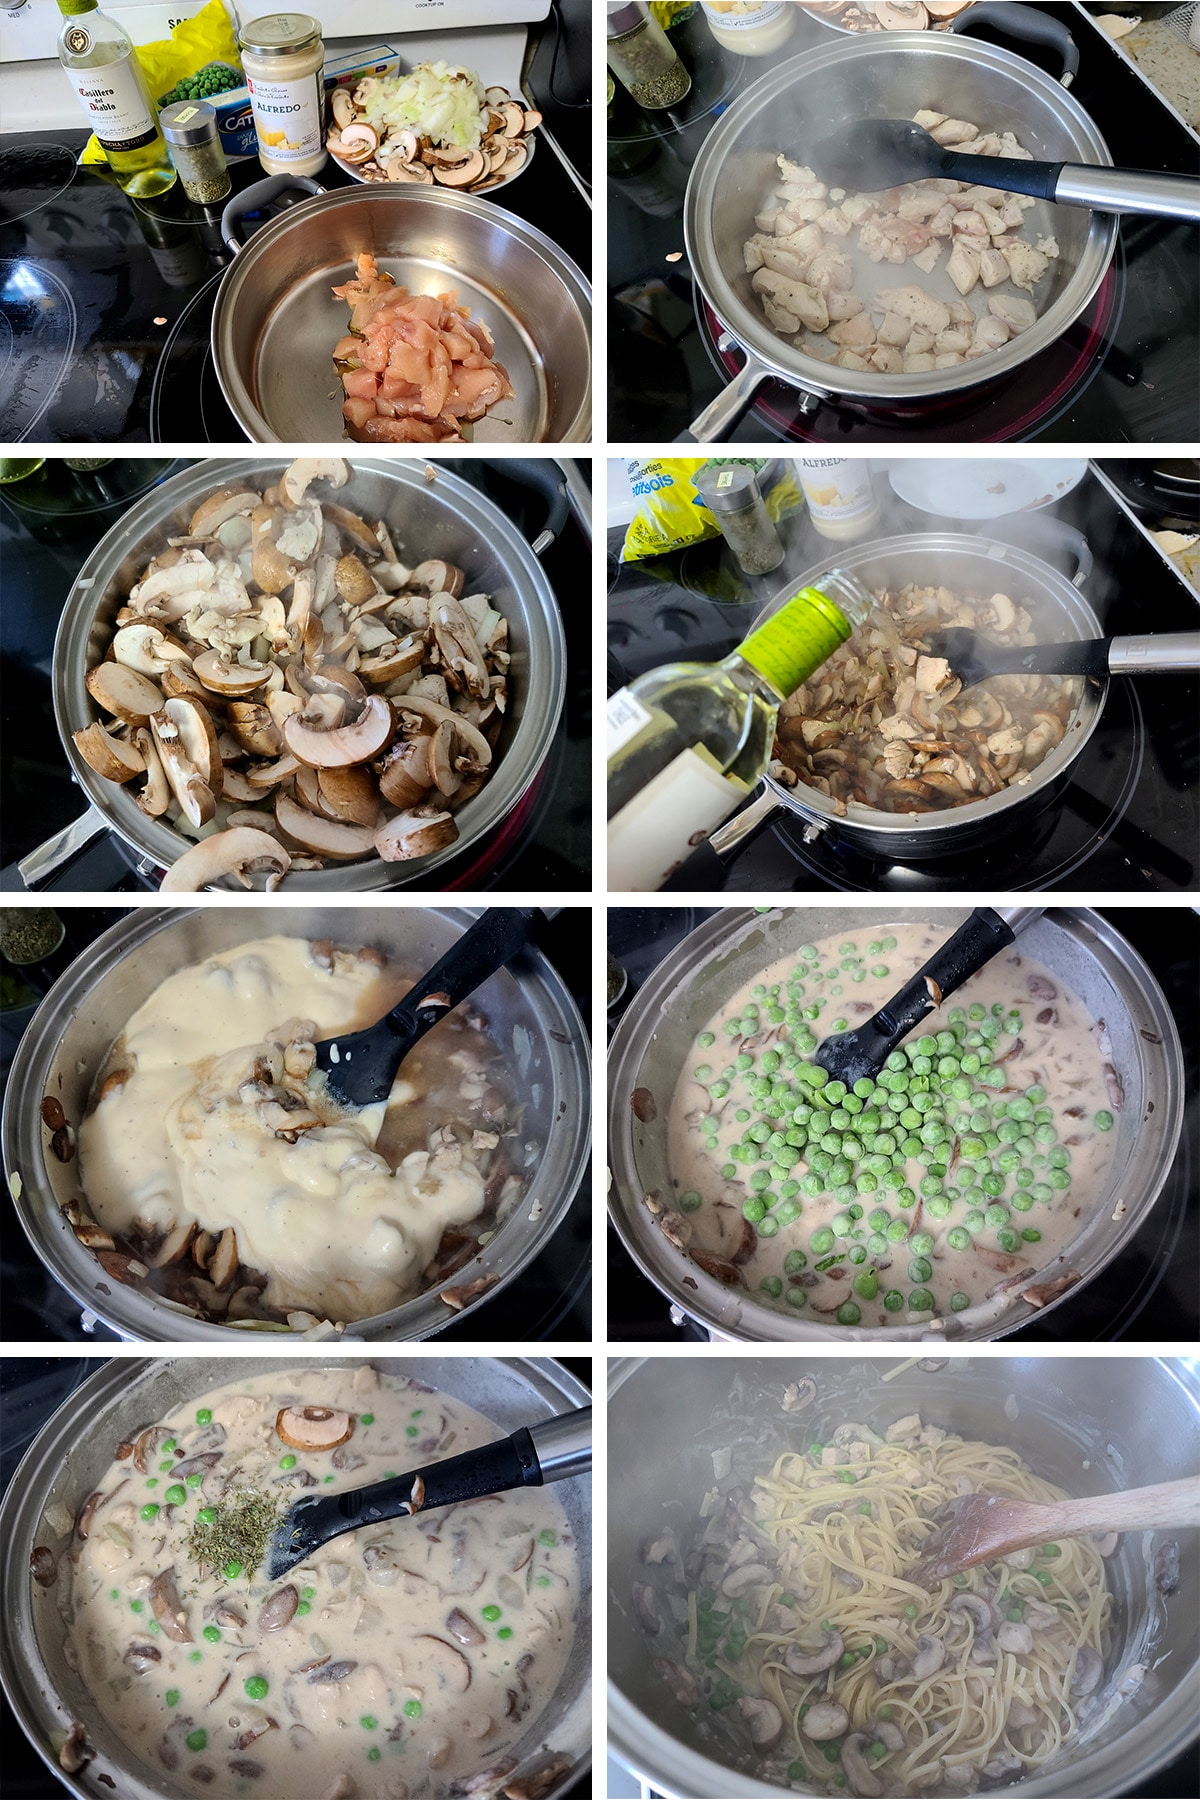 An 8 part image showing the steps to make chicken tetrazzini from store bought pasta sauce, as described in the post.